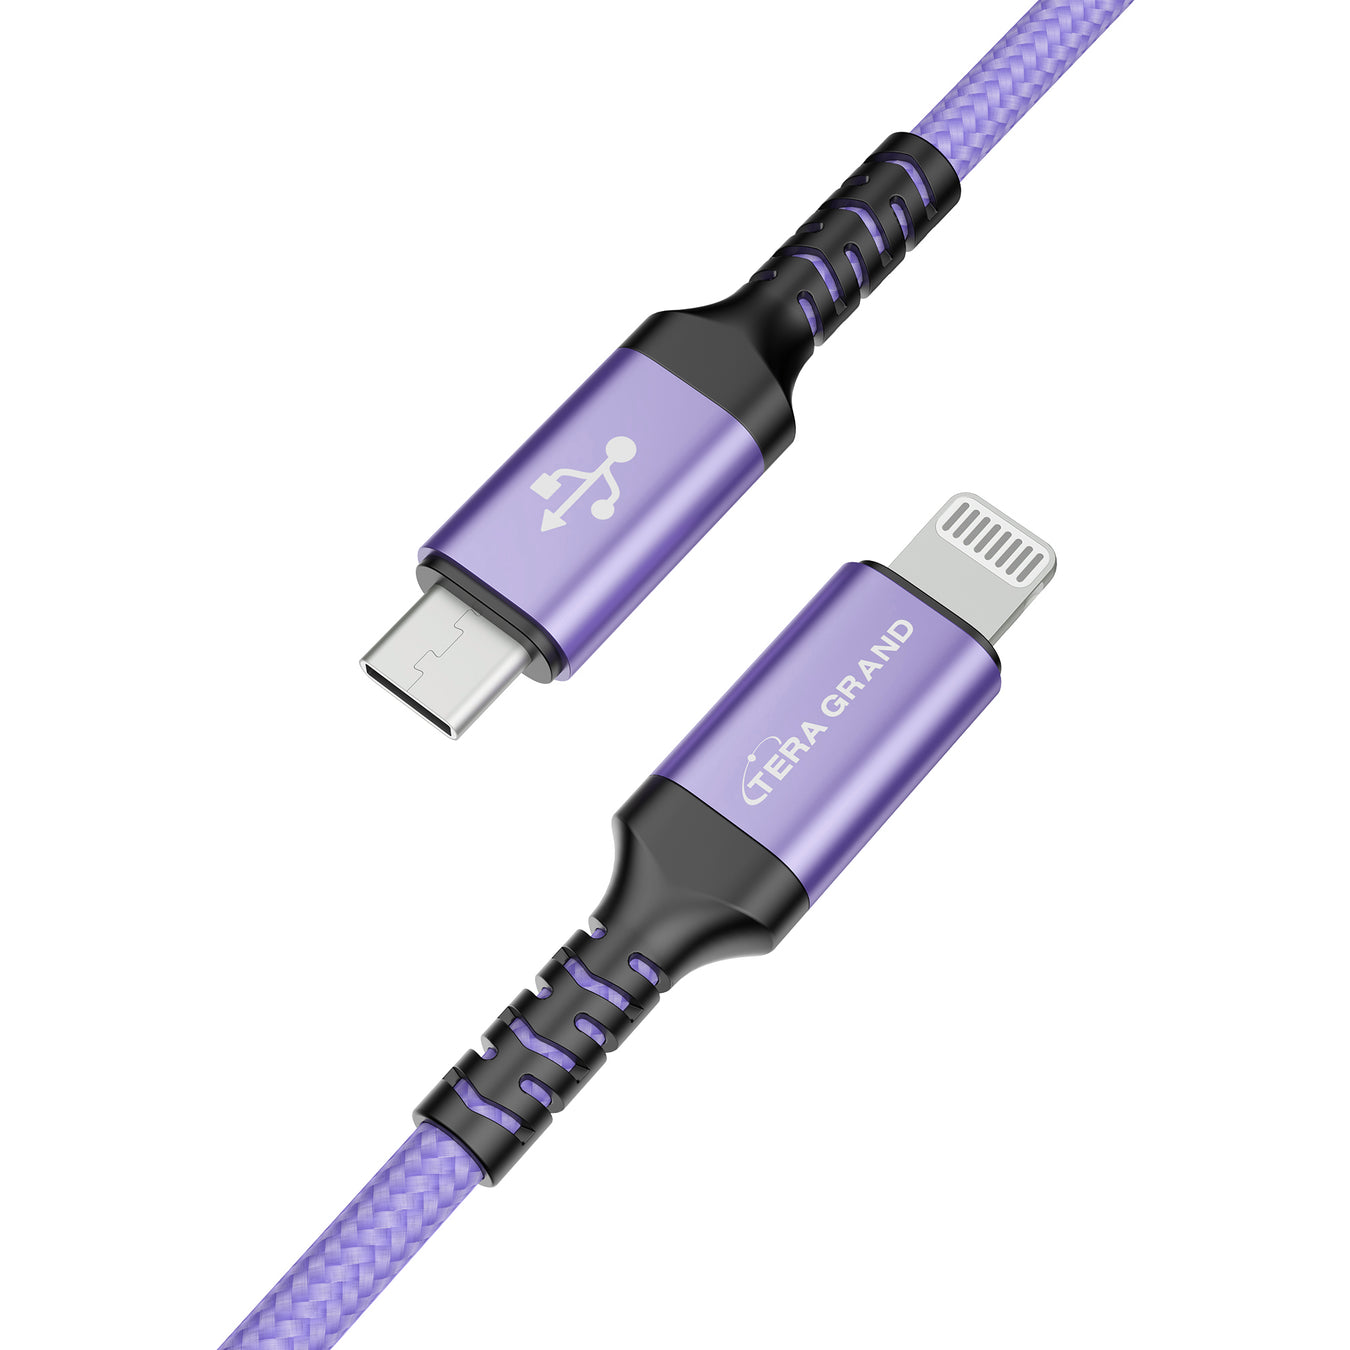 Apple MFi Certified Lightning Cables